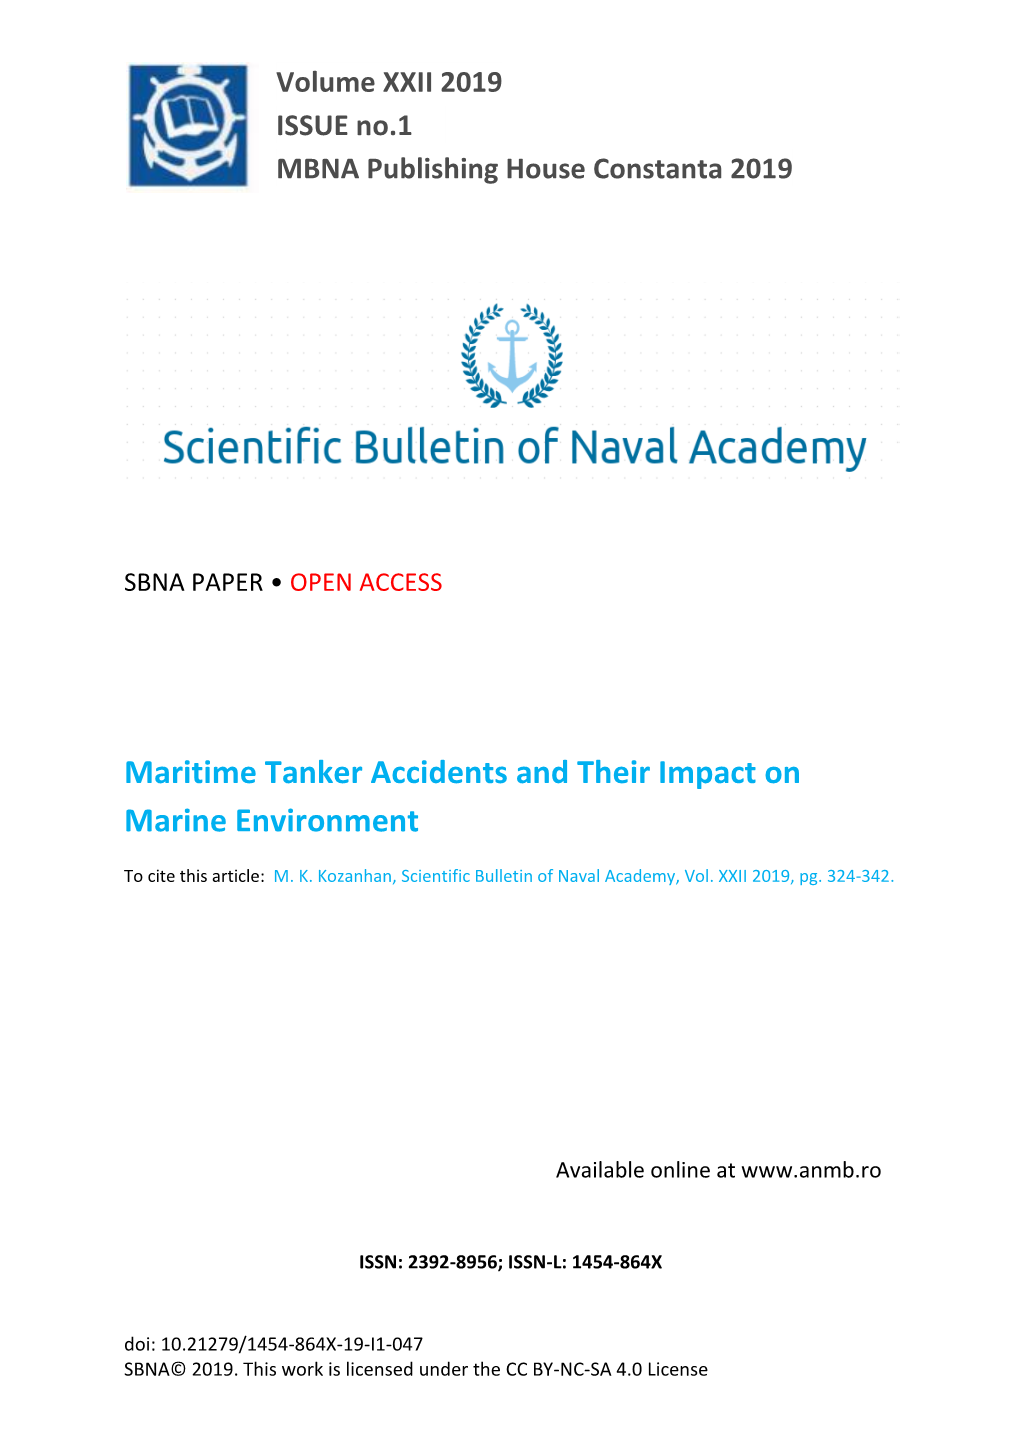 Maritime Tanker Accidents and Their Impact on Marine Environment